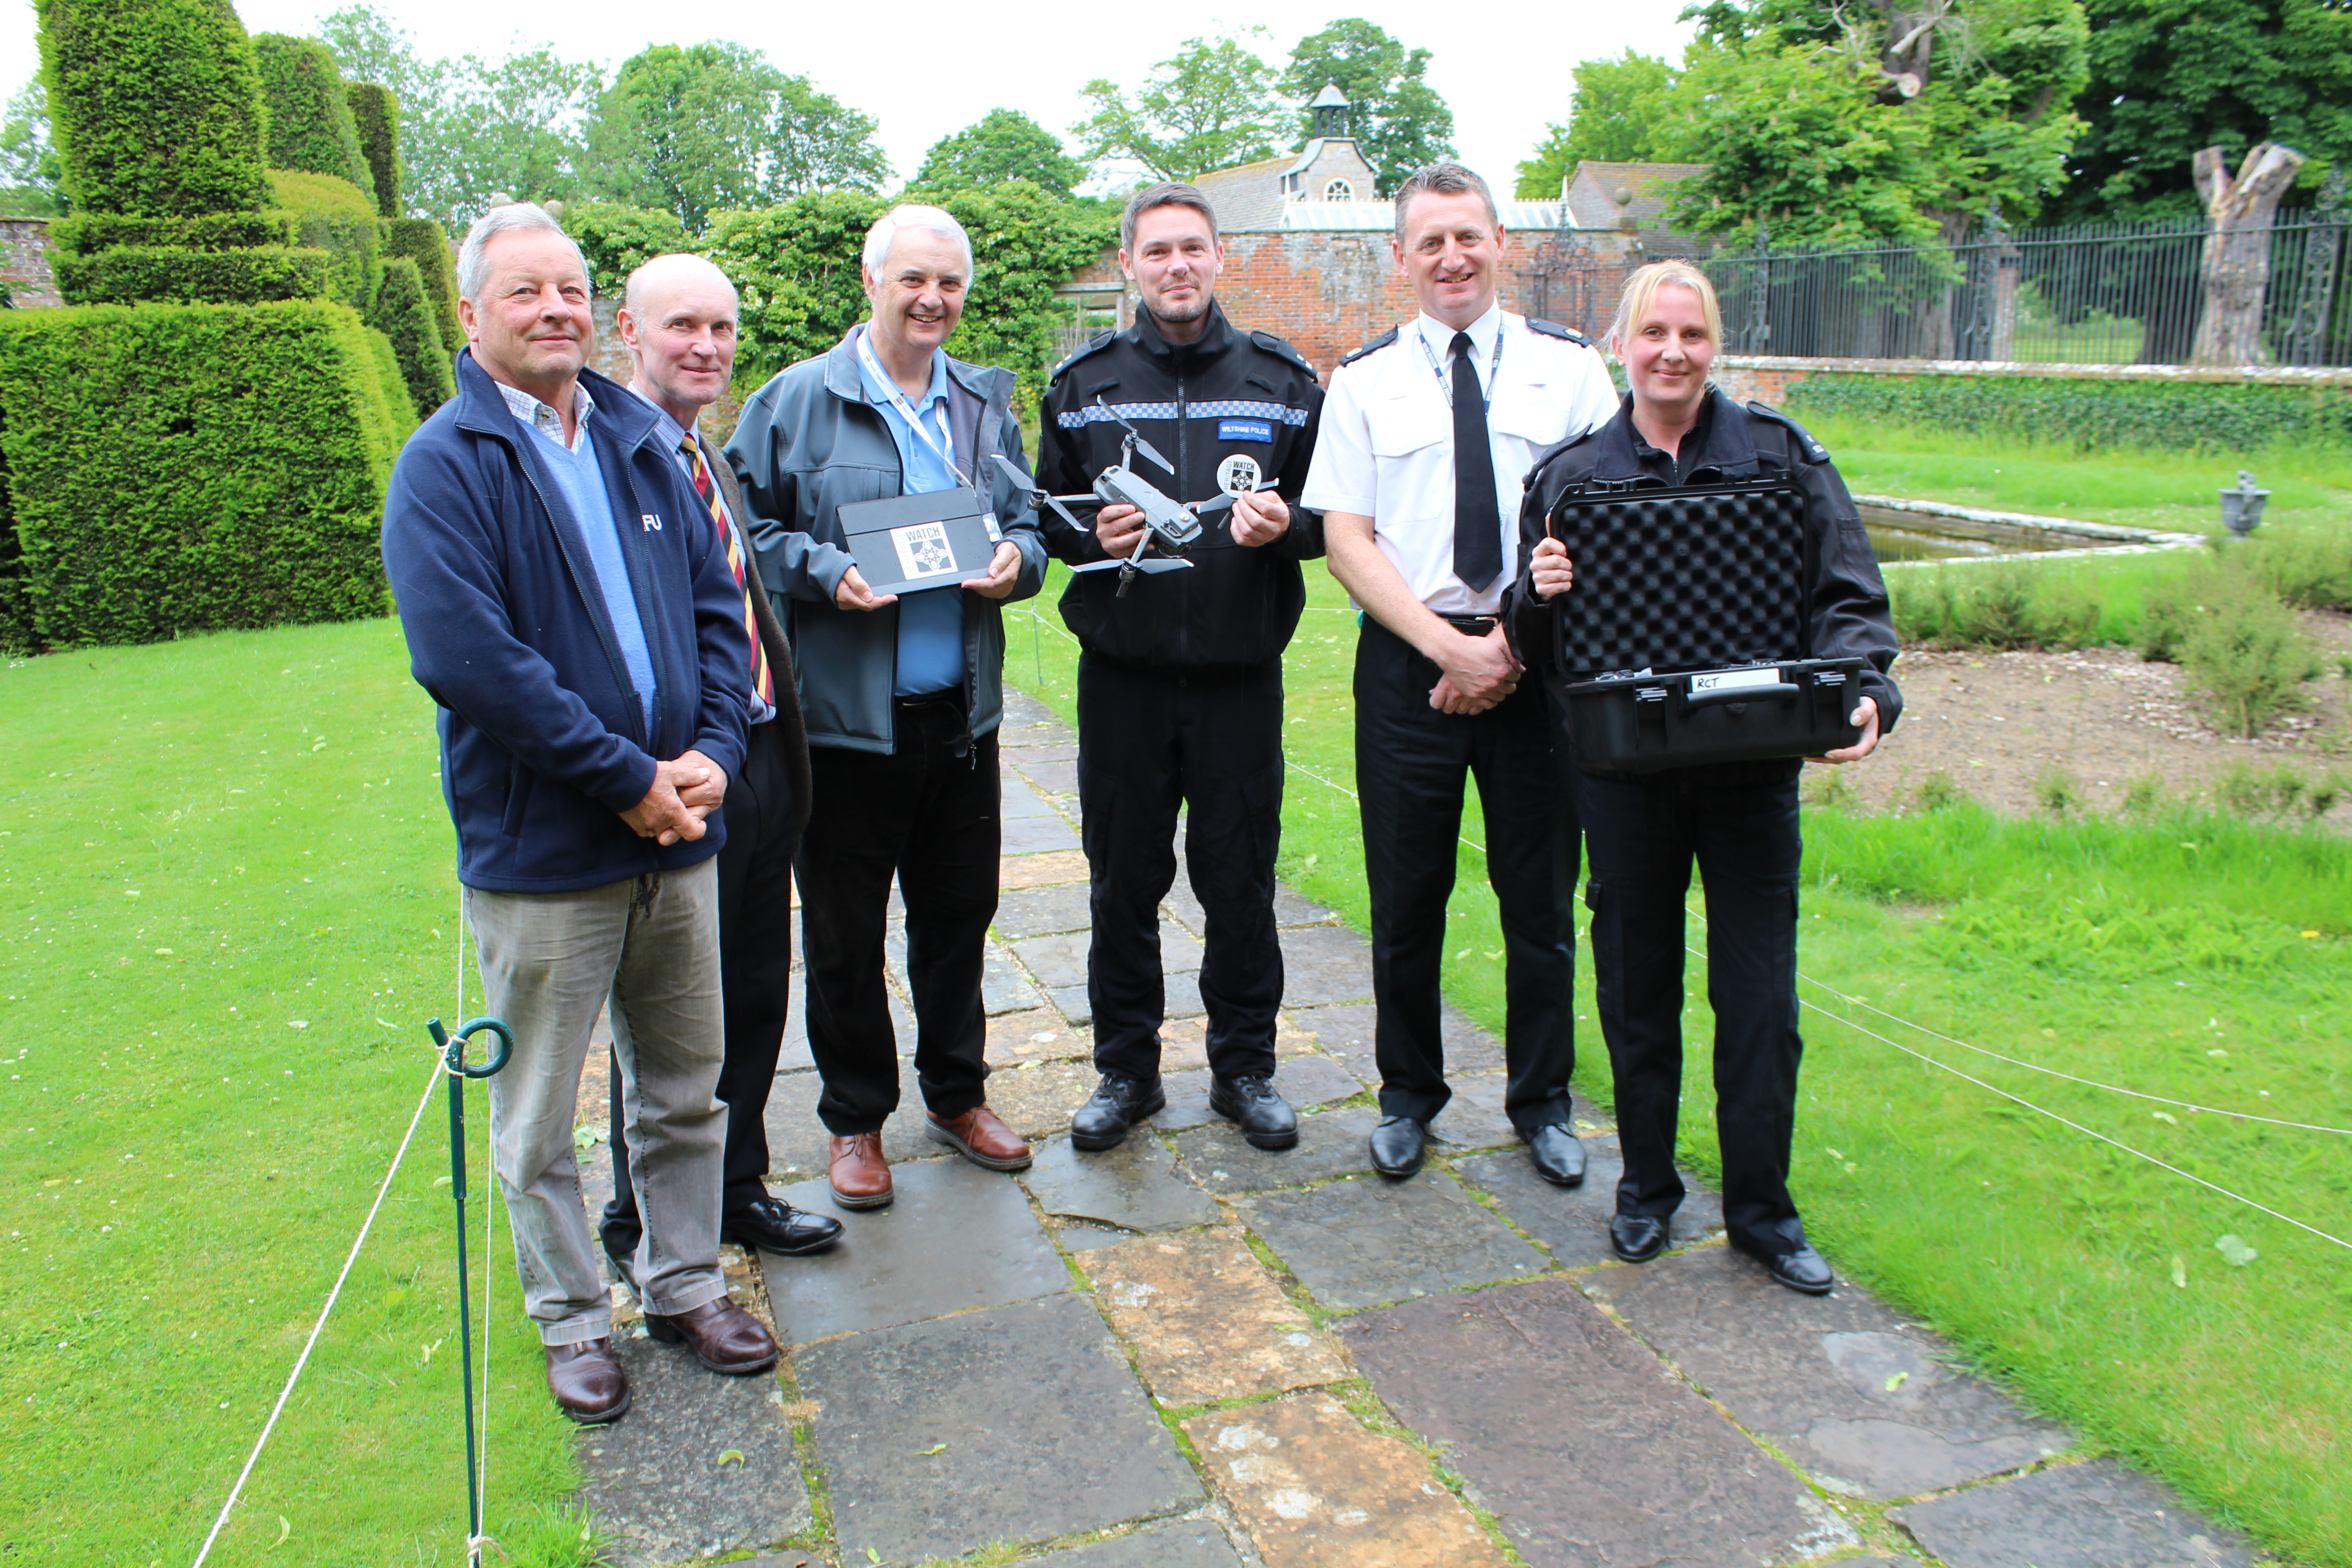 Picture shows (left to right): NFU Chippenham chairman Nick Bush, NFU Wiltshire chairman Mark Jeffery, Head of Heritage Crime Strategy for Historic England Mark Harrison, rural crime officer PC Marc Jackson, Supt Phil Staynings and rural crime officer PC Emily Thomas with the new drone.